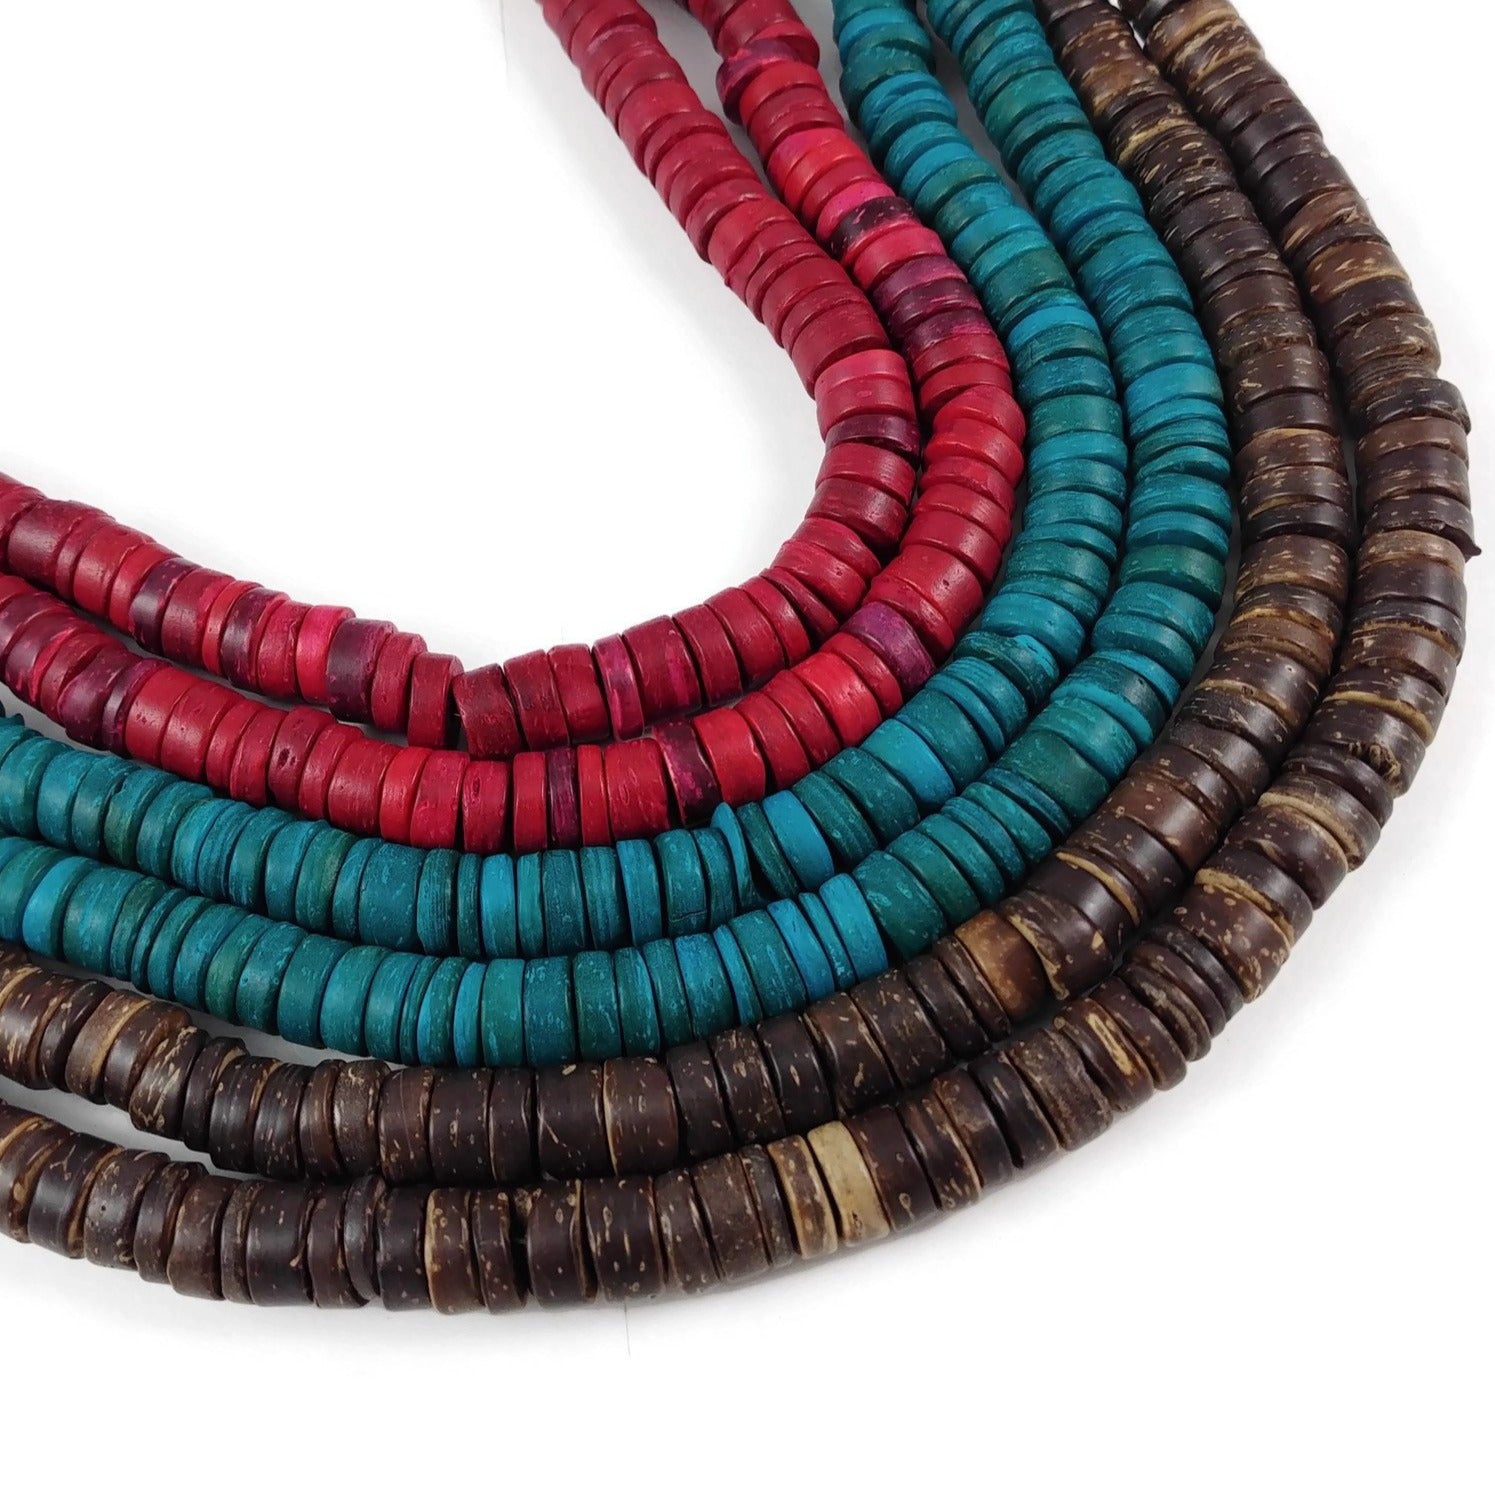 Coconut beads - eco friendly rondelle beads 9mm - 100pcs